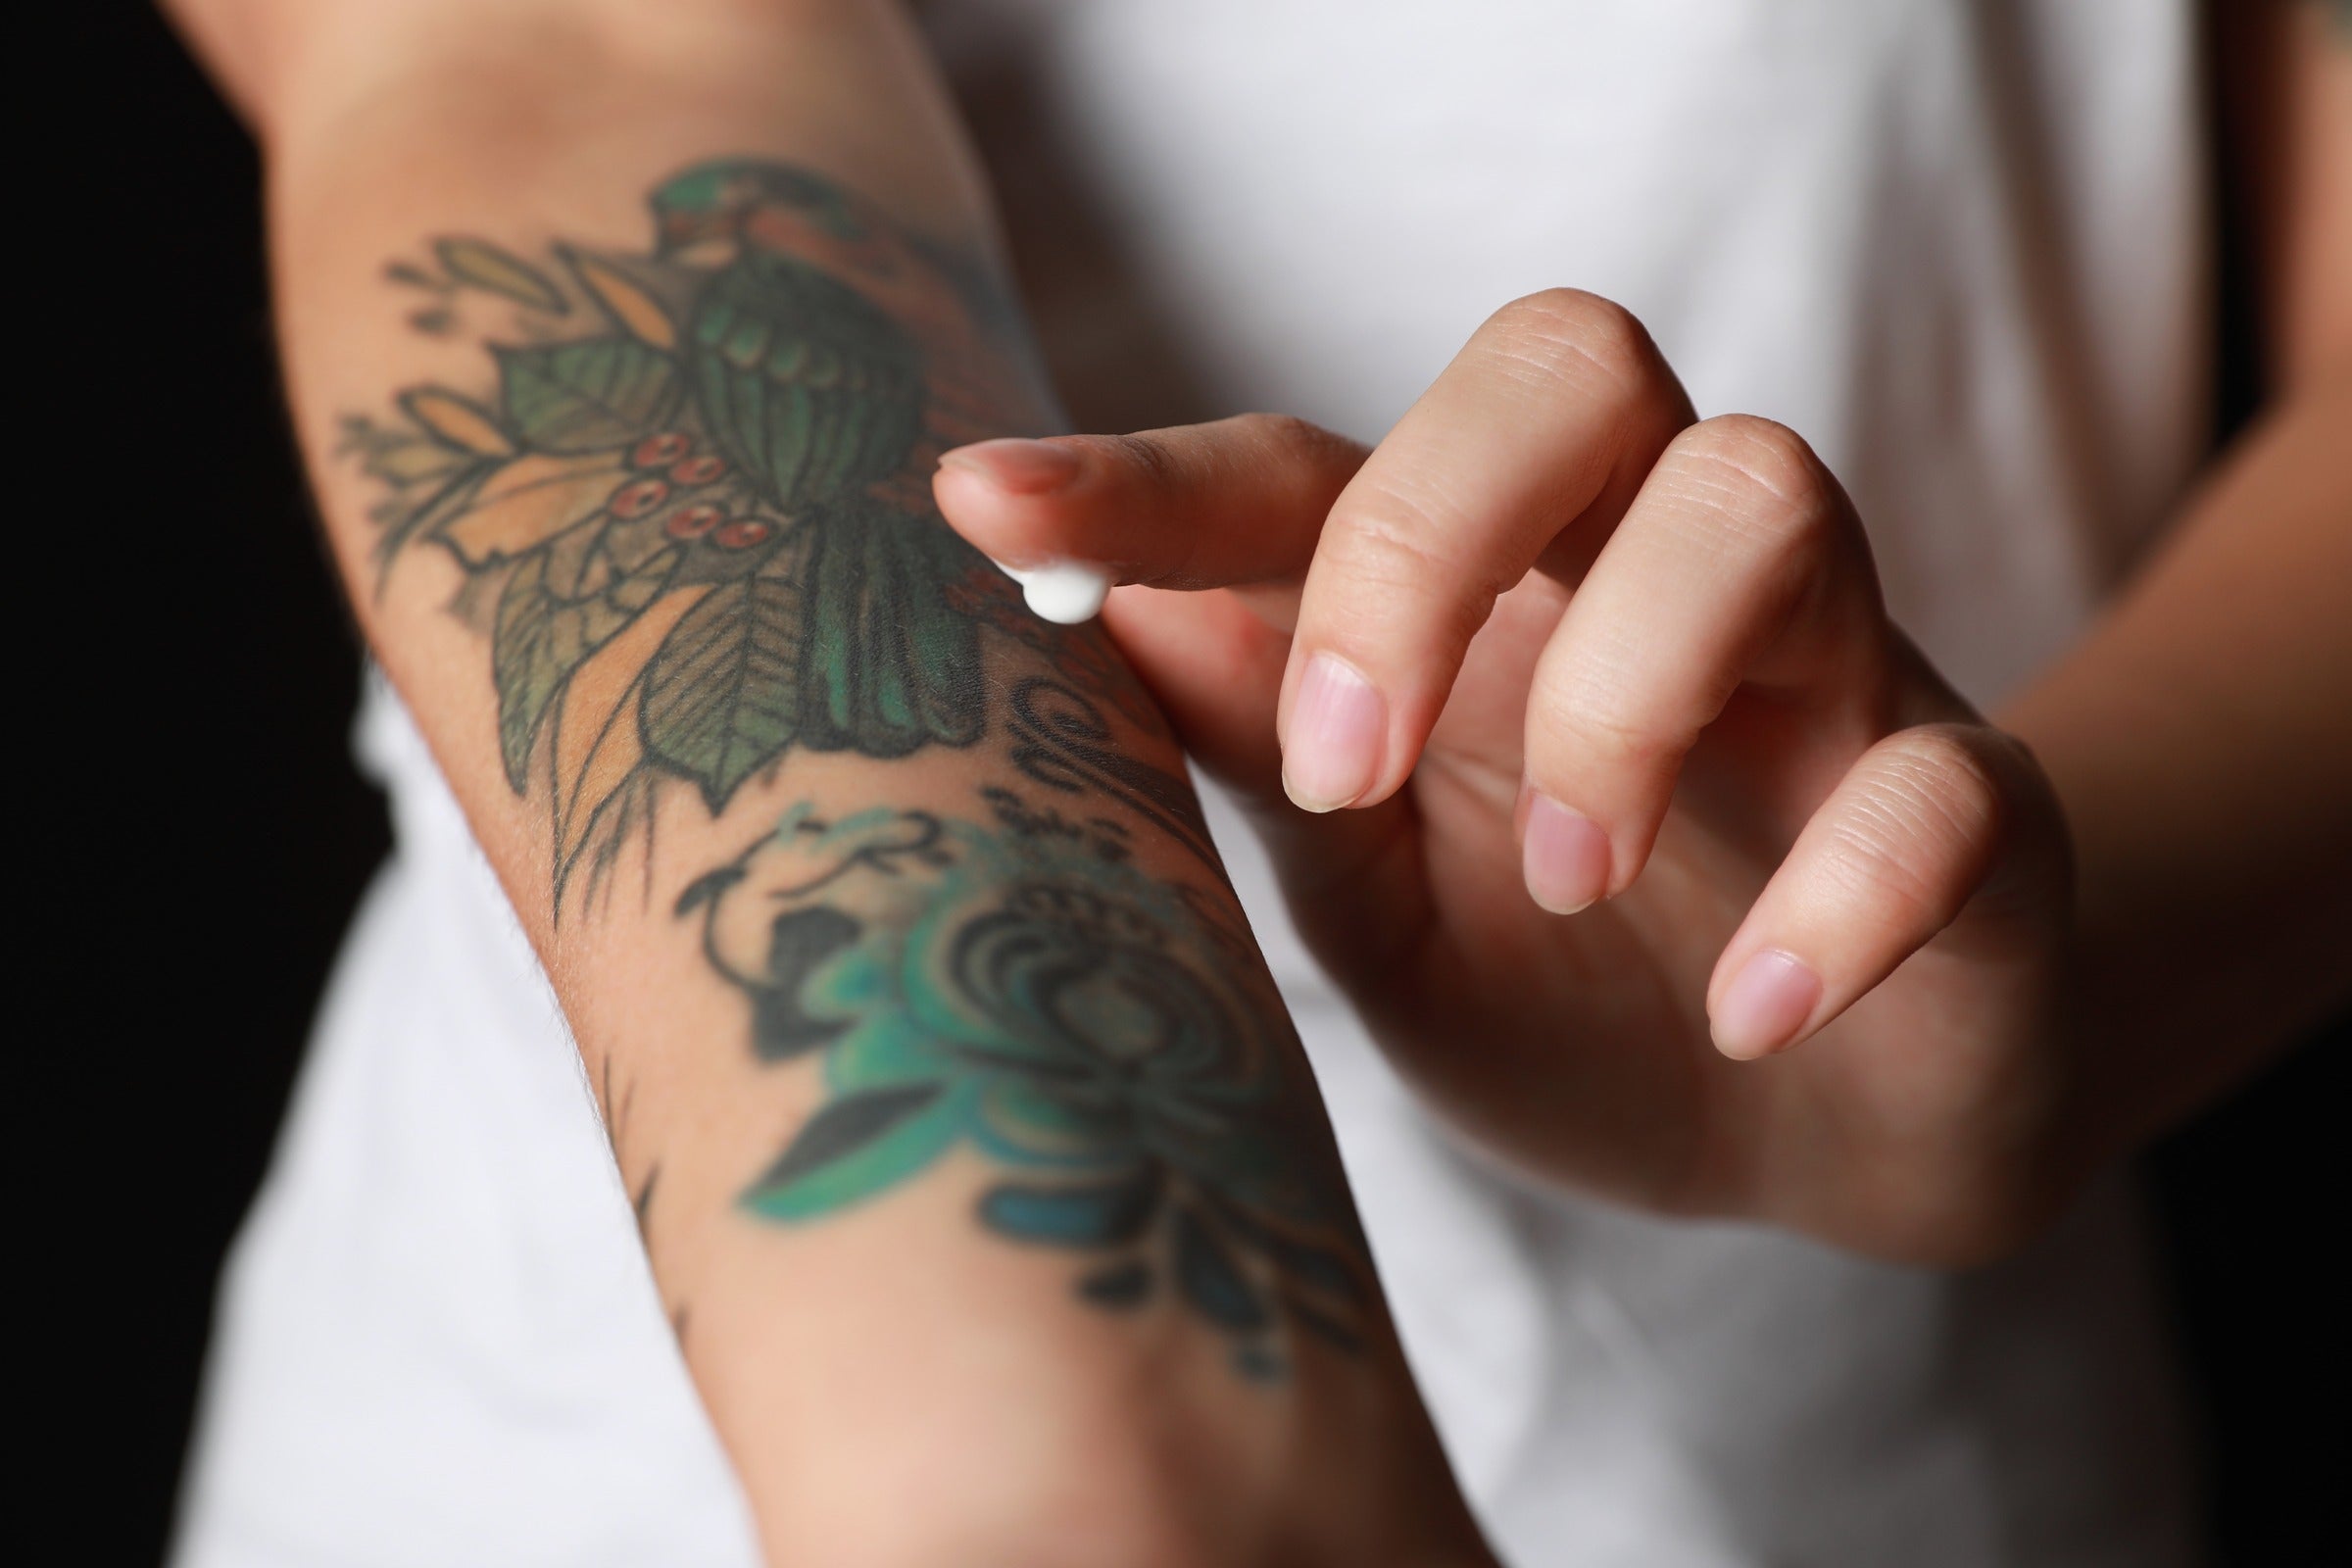 Aftercare for tattoos using CBD